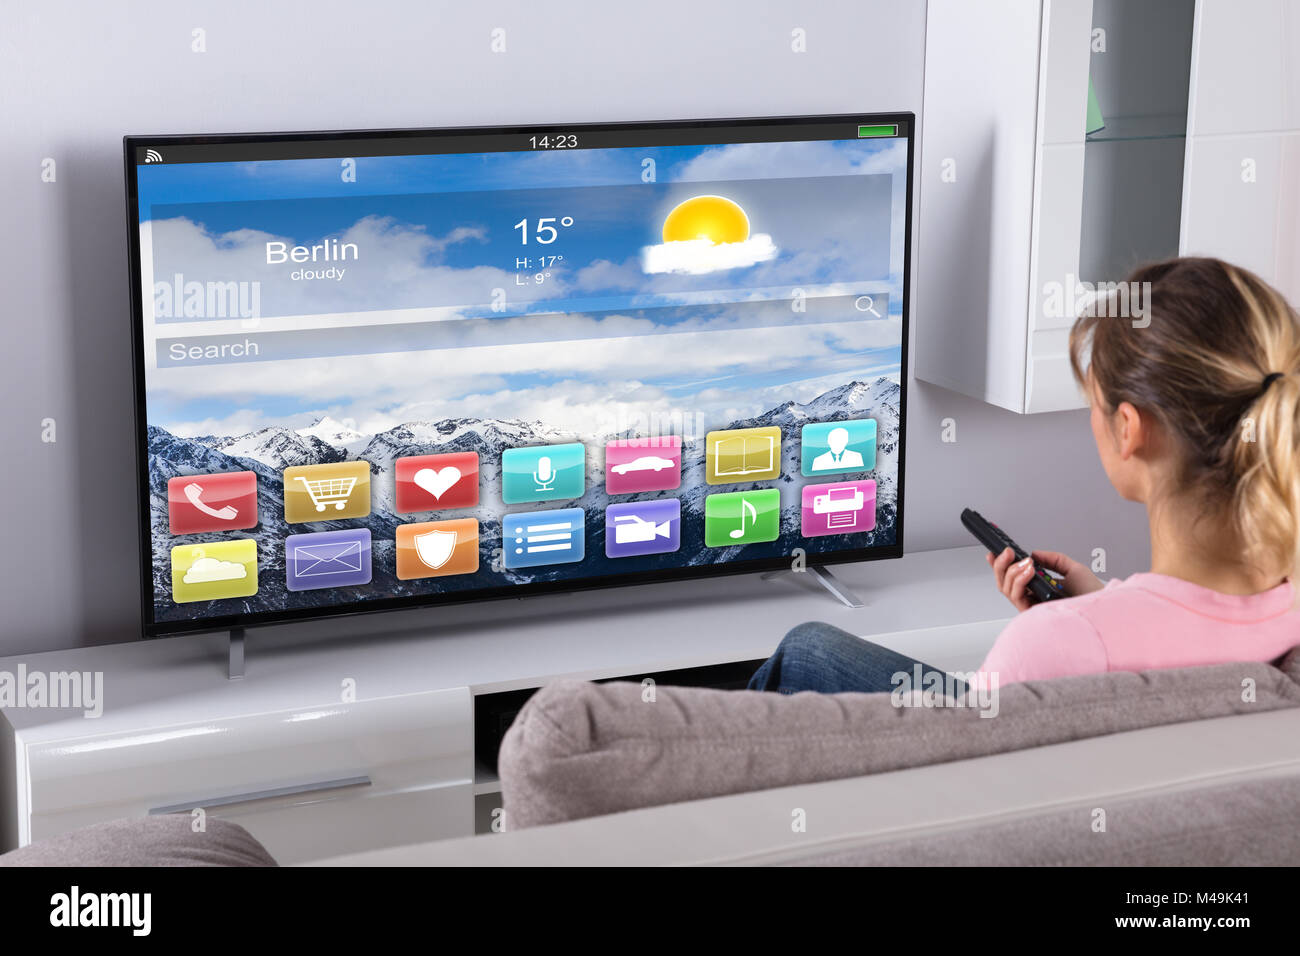 Young Woman Sitting On Sofa Using Remote Control In Front Of Television Stock Photo